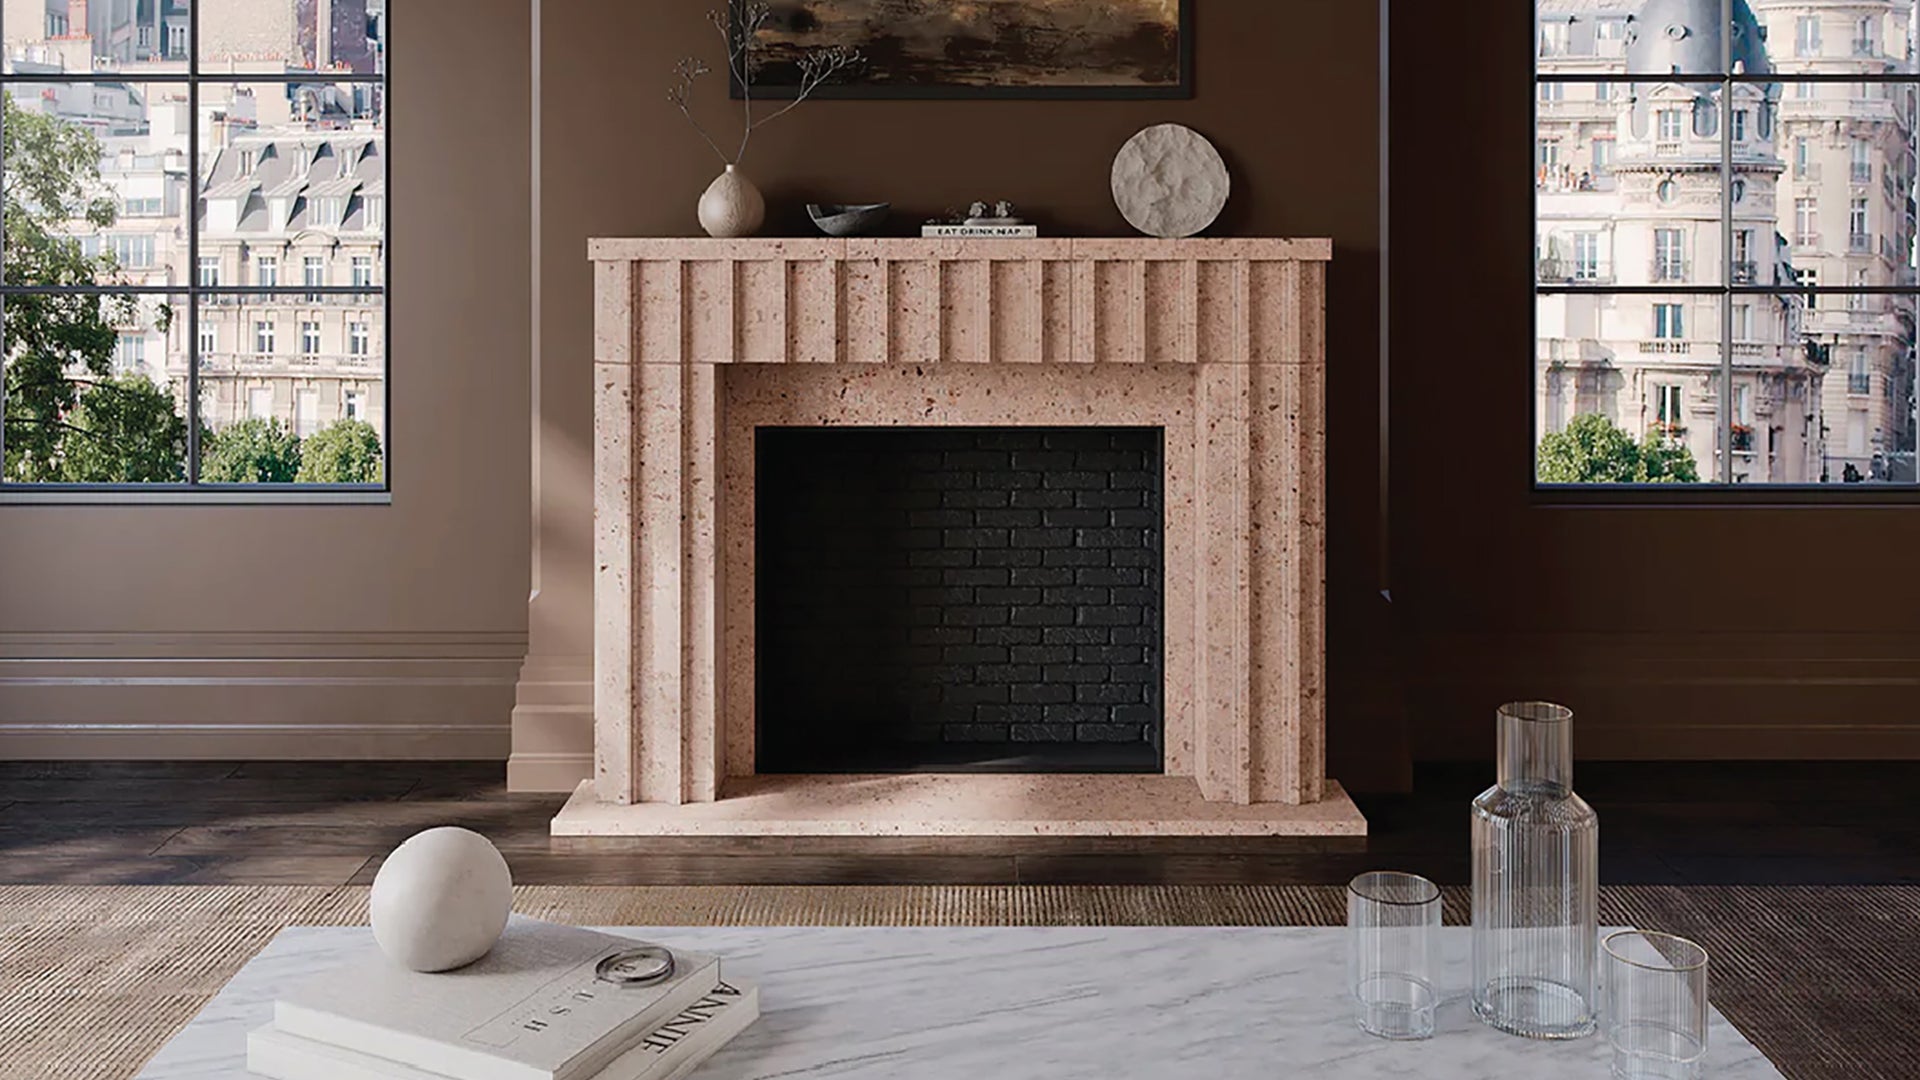 The Costine Fireplace in Date Adoquin by designer Denise McGaha